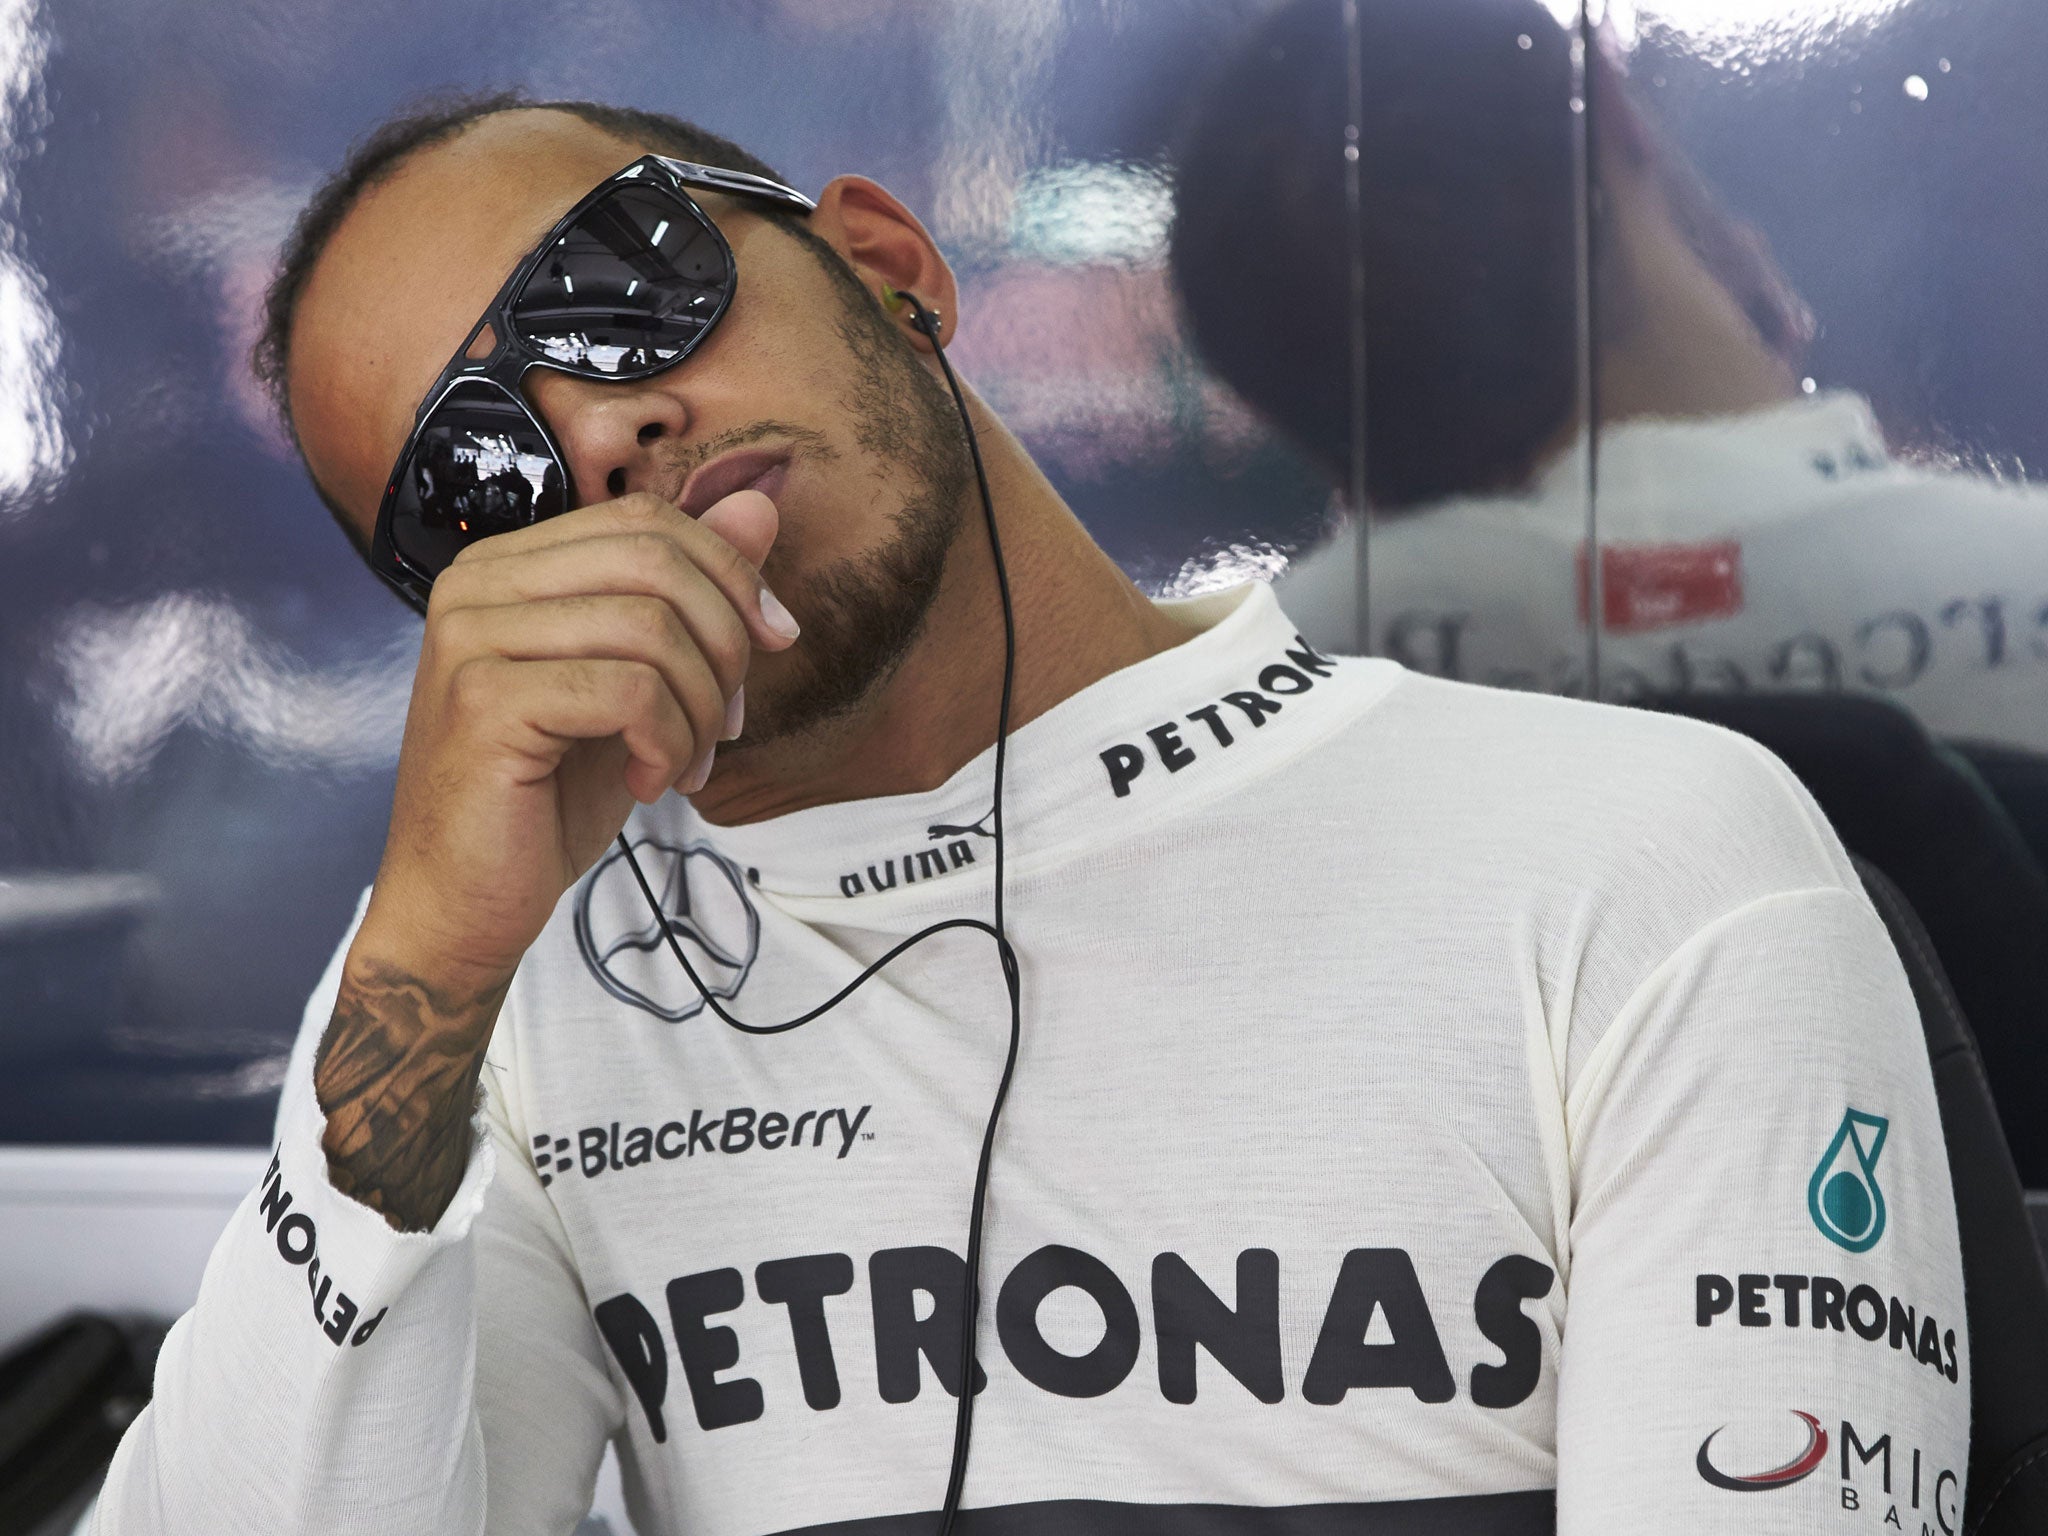 In the shade: Lewis Hamilton tunes out as political issues once again dominate the build-up to the Bahrain Grand Prix